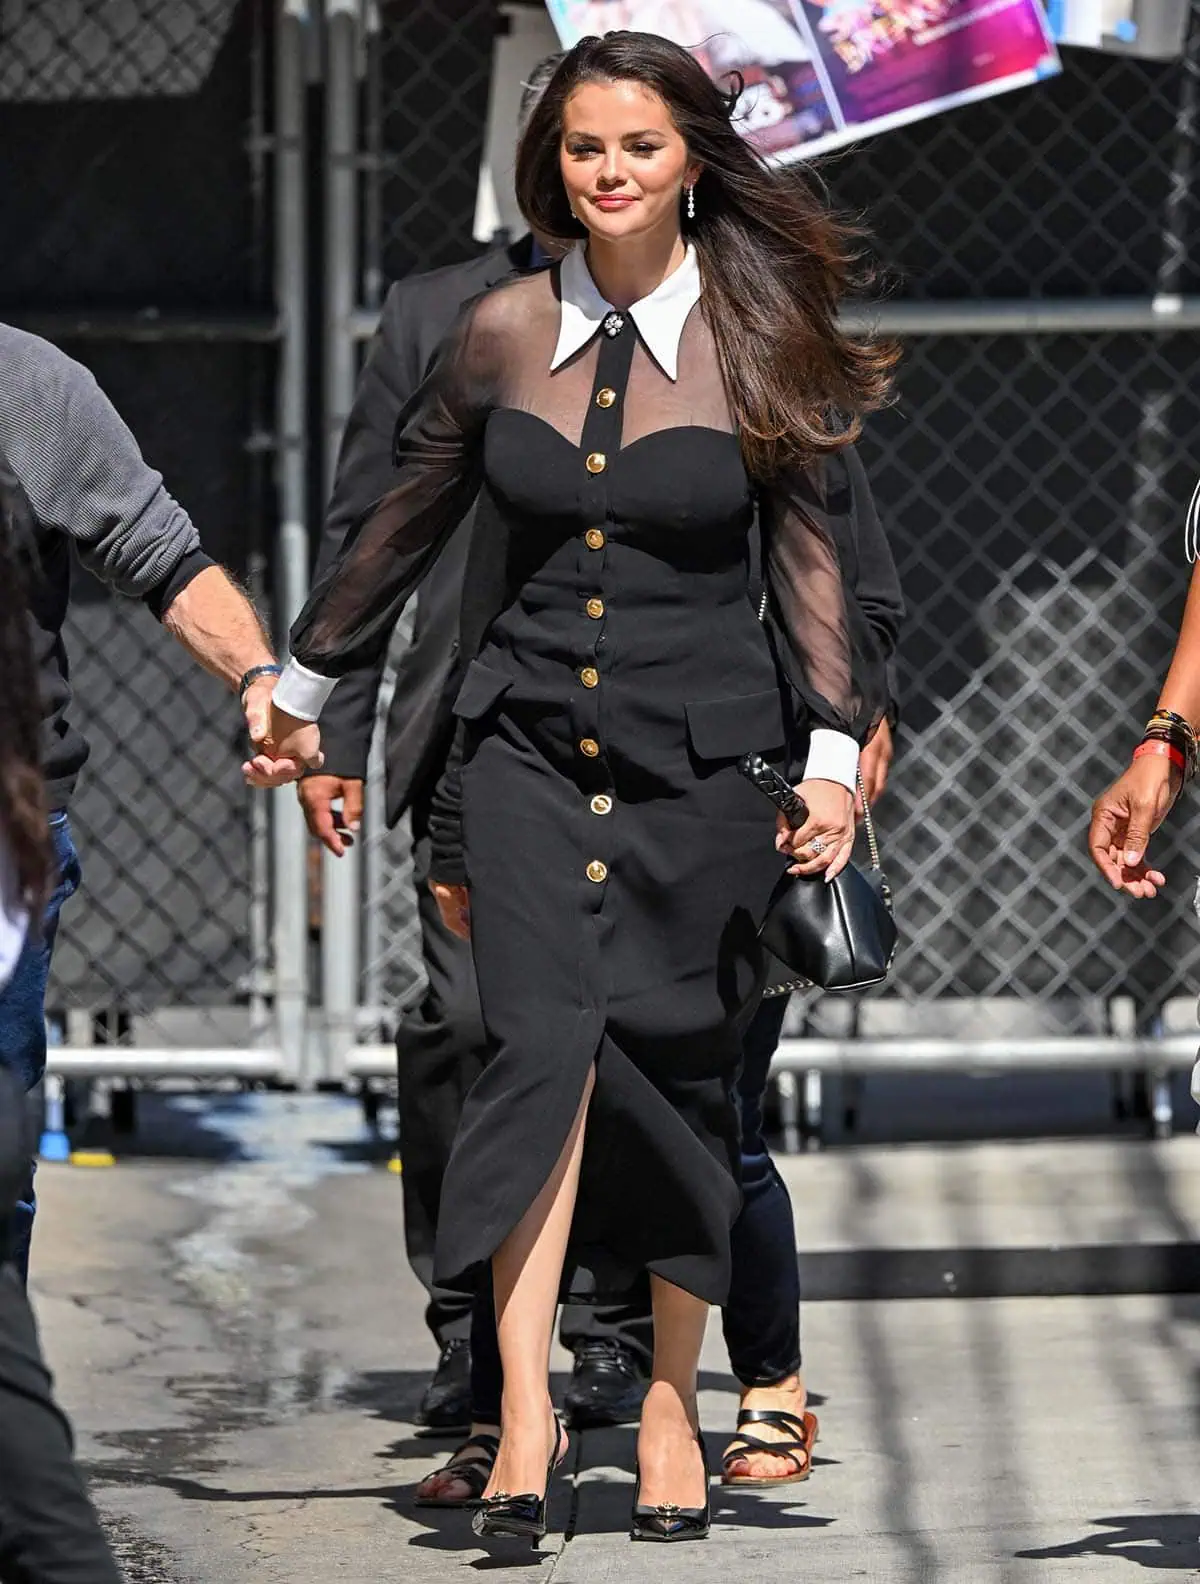 Selena Gomez exudes elegance in a black Versace dress with sheer sleeves and panel, gold Medusa buttons, a white Swallowtail collar, and white cuffs